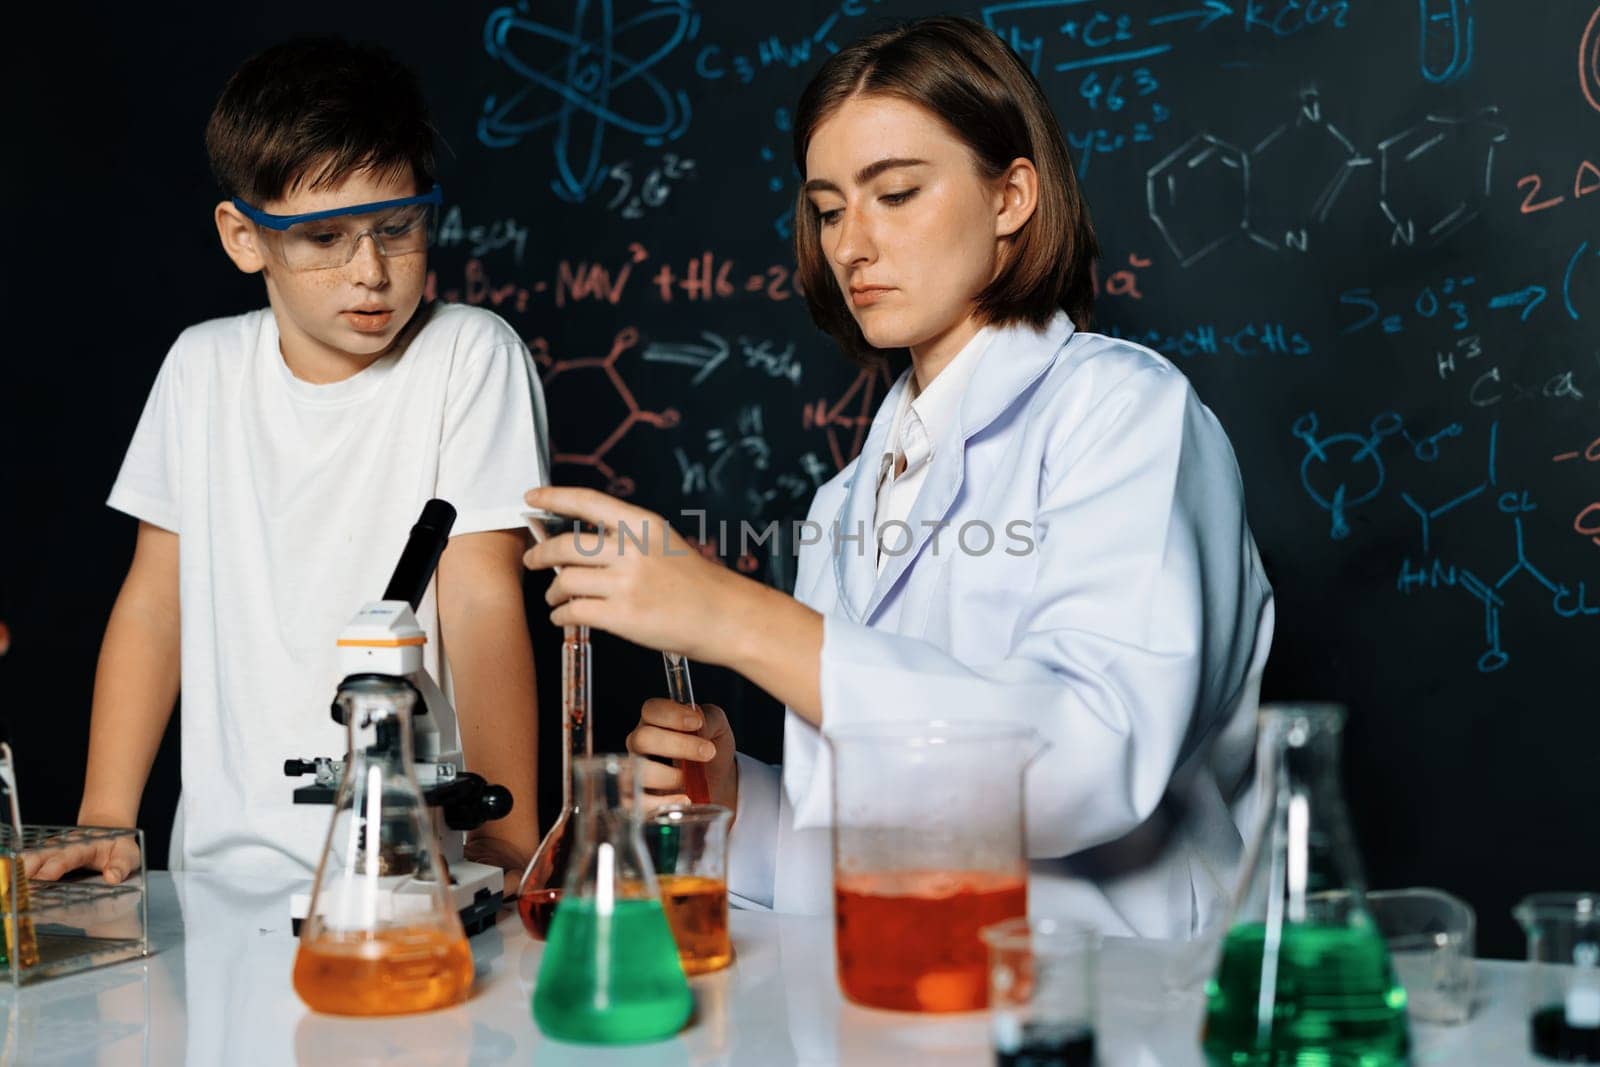 Teacher support schoolboy in laboratory. Schoolboy and teacher stand and experiment about science of chemistry in STEM class using liquid in glass container. Instructor mixing solution. Erudition.